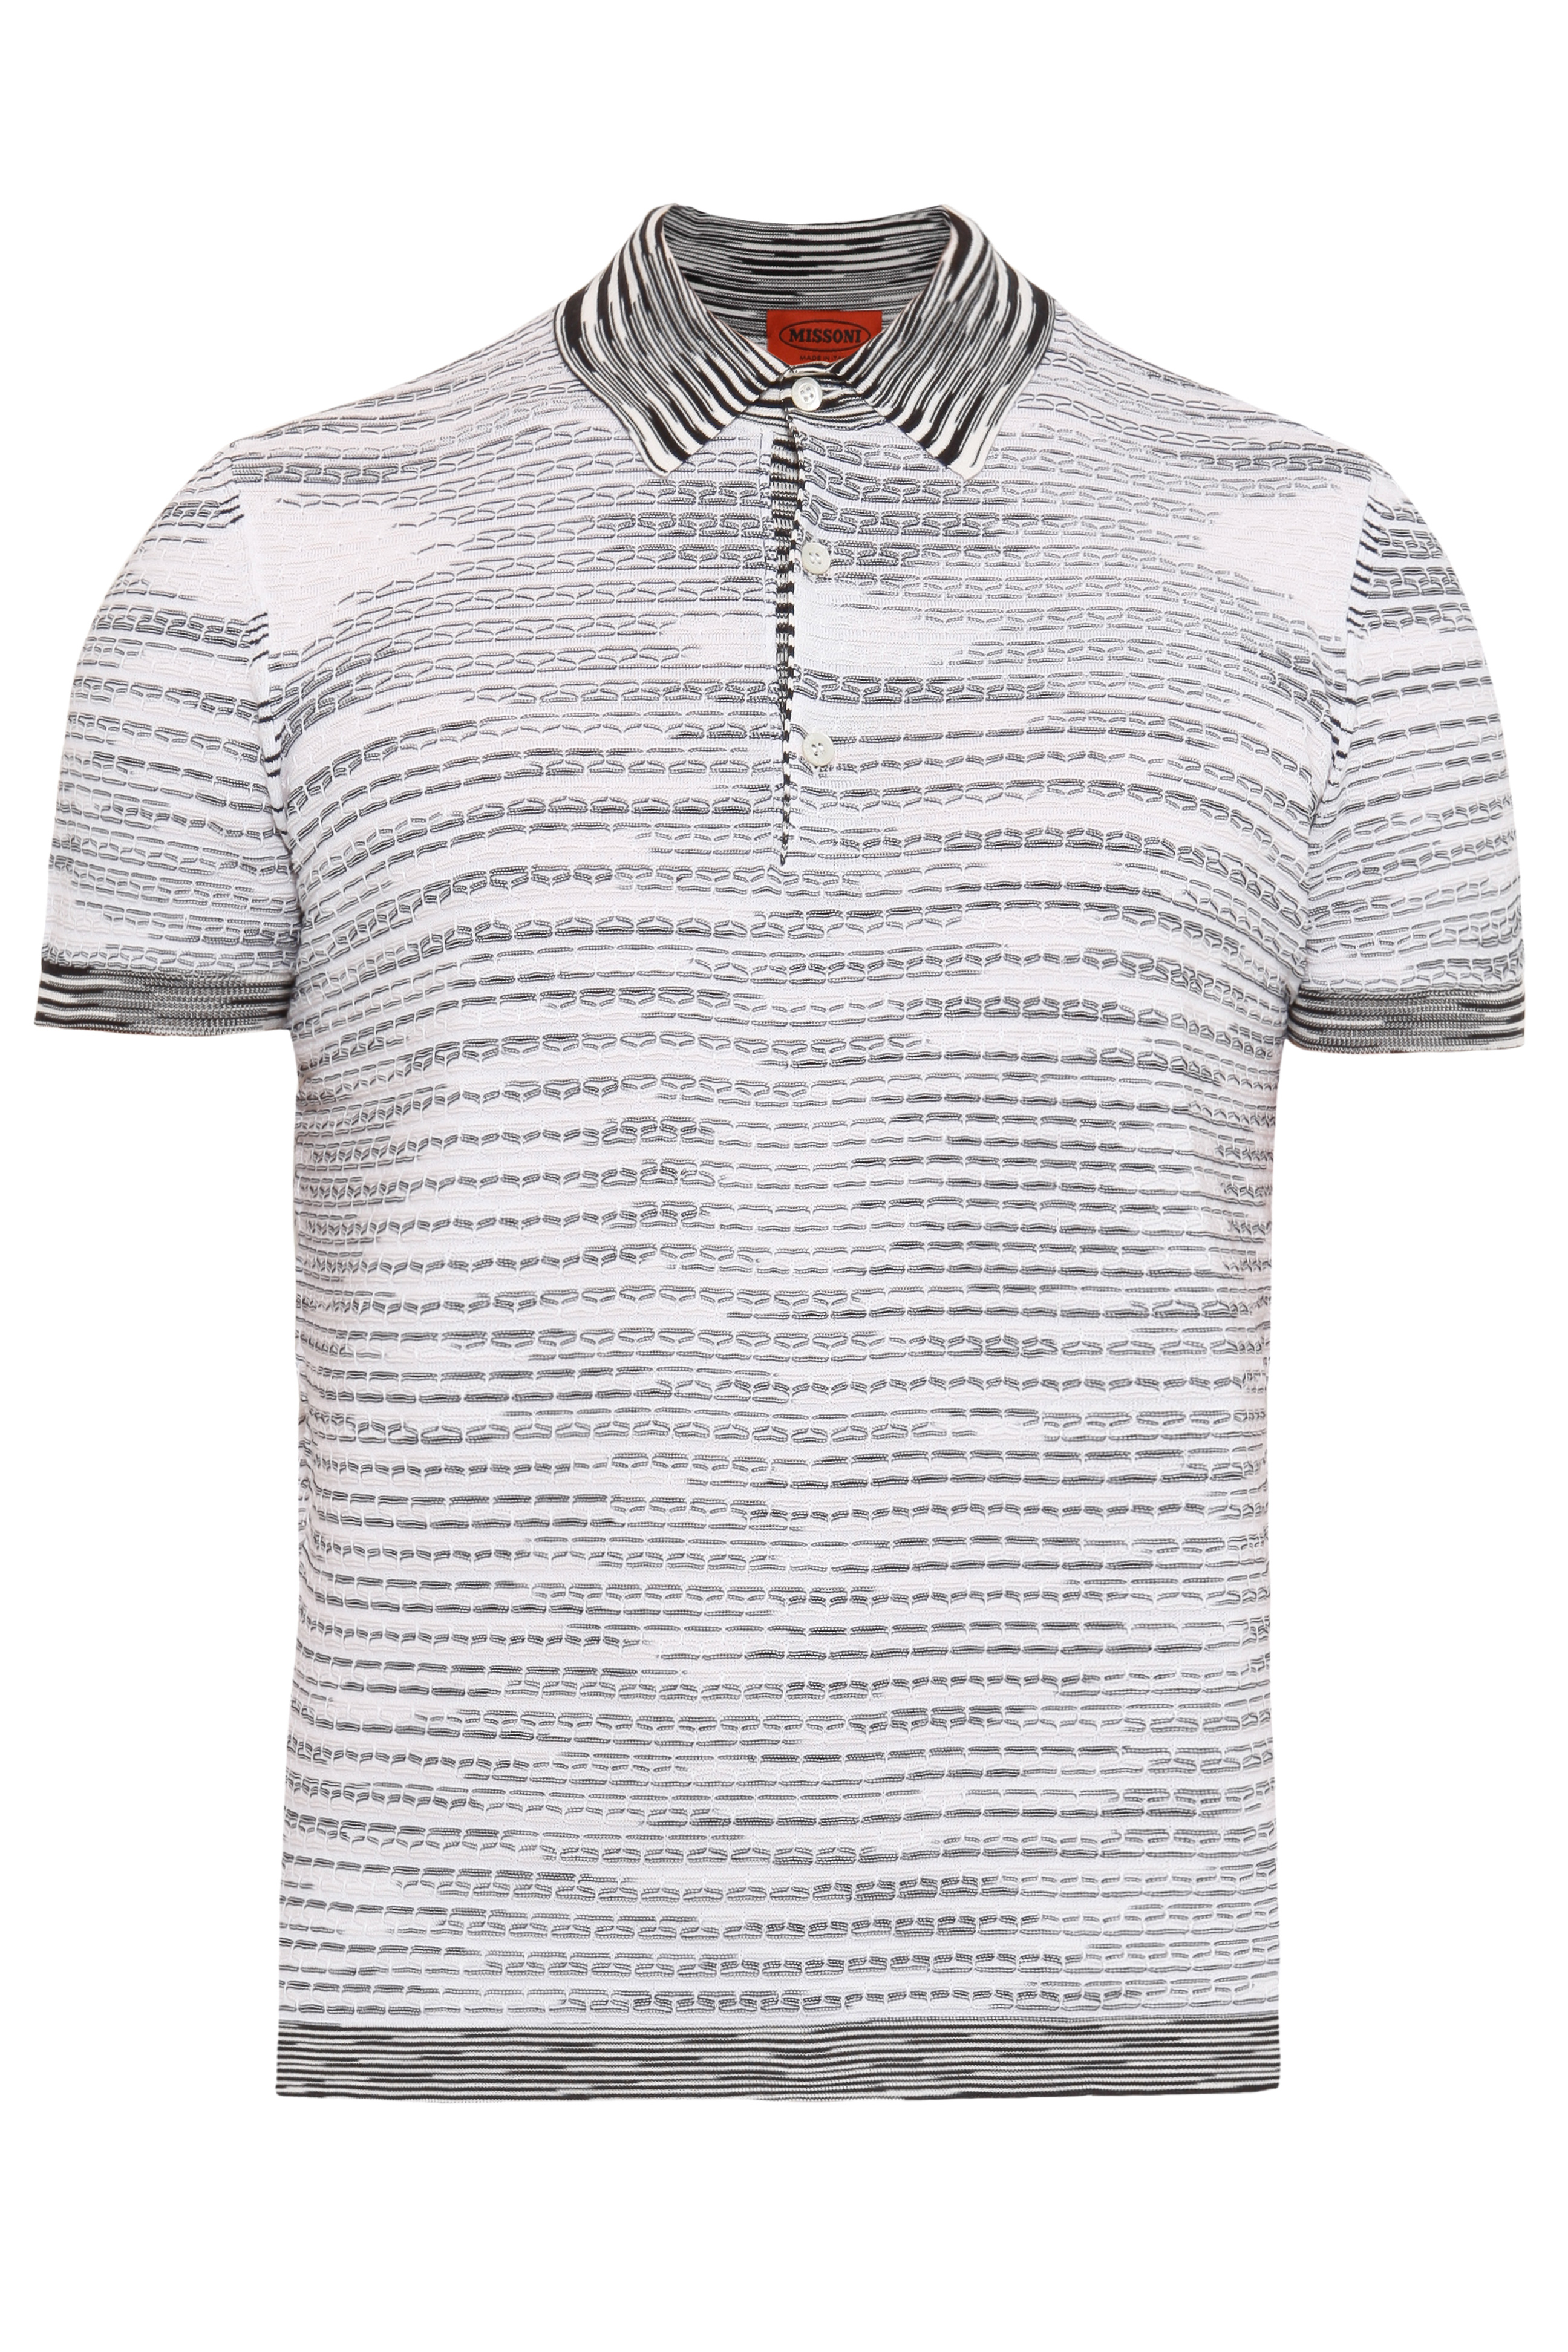 Lyst - Missoni Exclusive Patterned Cotton Polo Shirt in Black for Men